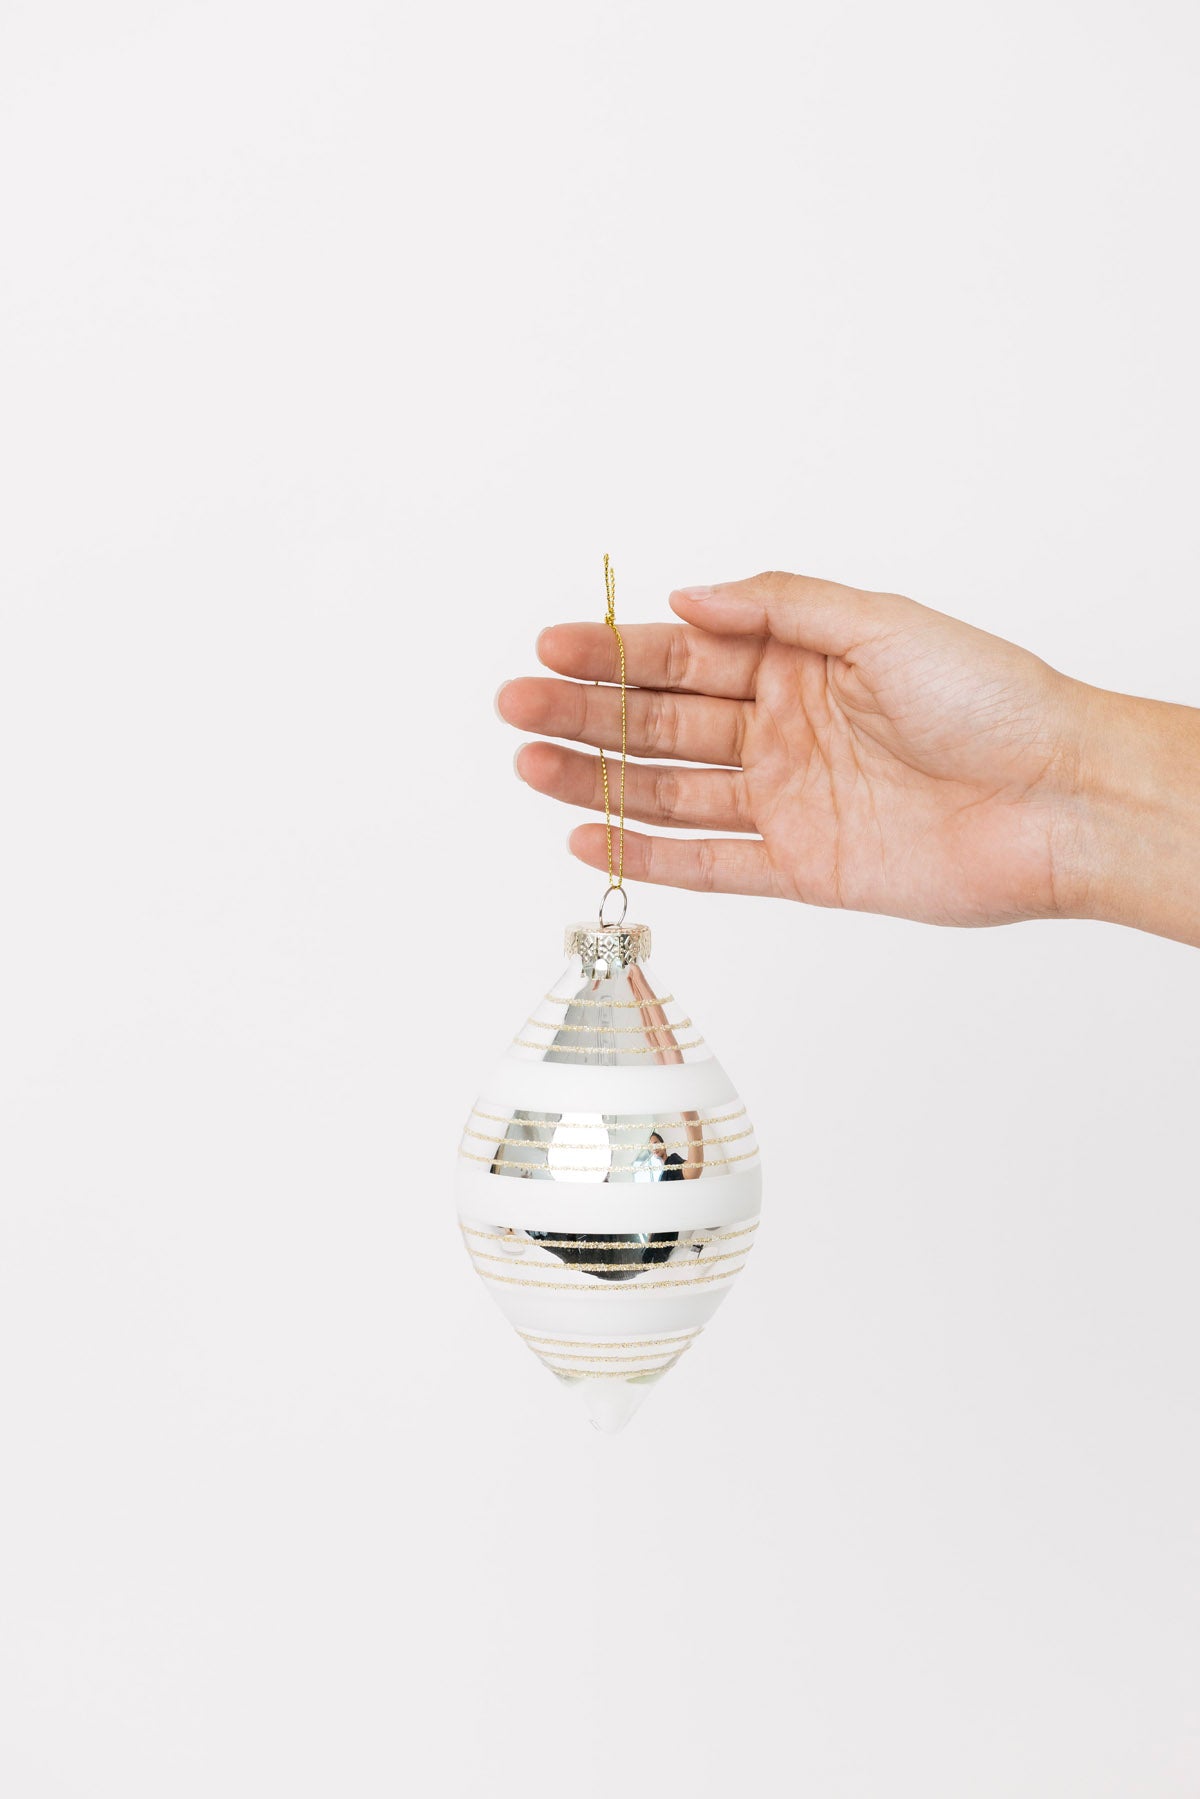 Everything Nice Striped Ornament - Finial